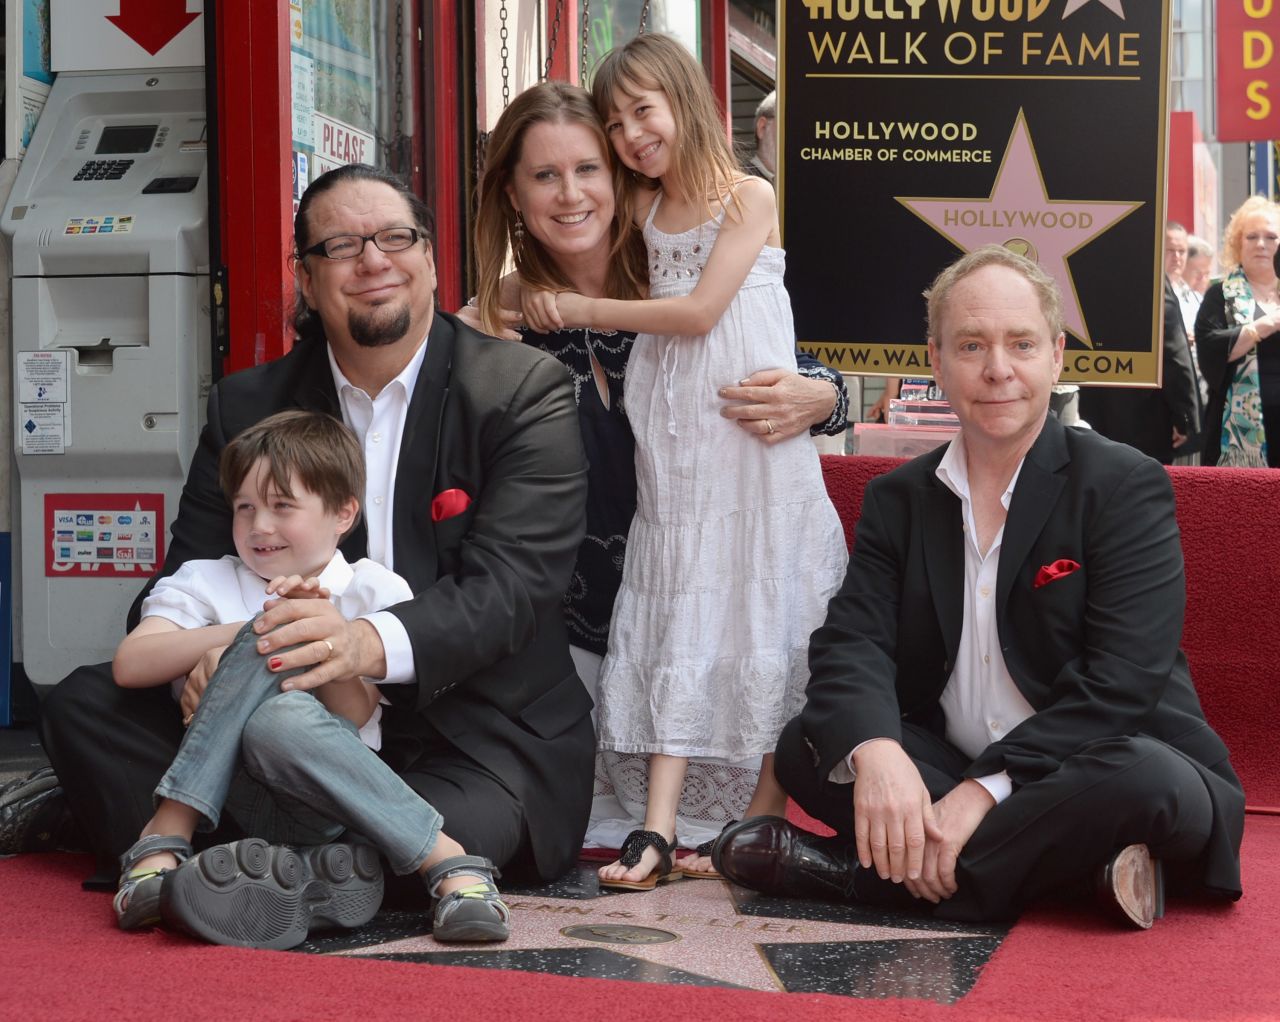 We suppose magician Penn Jillette, seen here with his family and magic partner Teller in April 2013, really wanted magical names for his kids. His son's name, Zolten, is actually his wife, Emily's, maiden name, while his daughter's name is more creative: Moxie Crimefighter. "I love that it's a purely American word ... and I love that it stands for old-fashioned spunk and energy," <a href="http://celebritybabies.people.com/2007/06/13/cbb_exclusive_p/" target="_blank" target="_blank">Penn said</a> in 2007. 